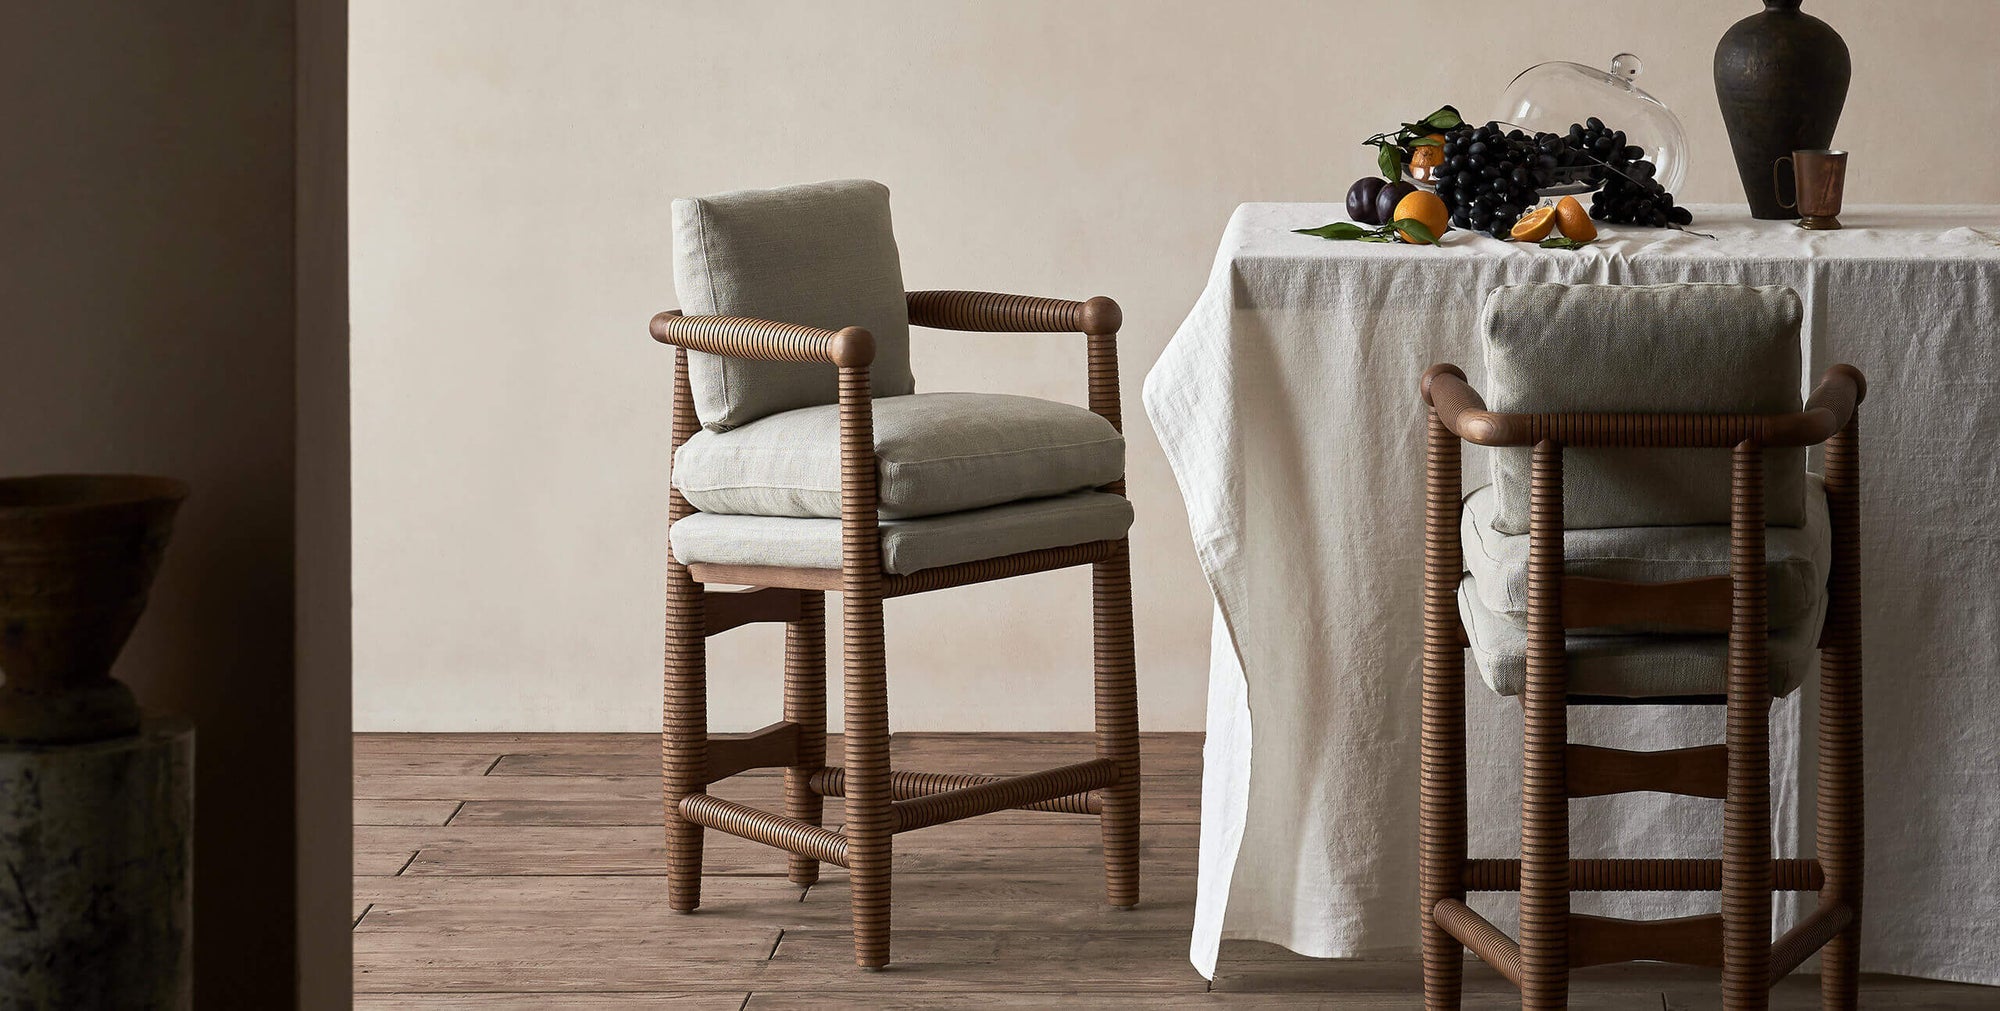 Two Gio Dining Stools in Heritage Ash frame and cushions in Jasmine Rice, a light warm greige Medium Weight Linen, sitting at a counter height table covered in a white linen tablecloth